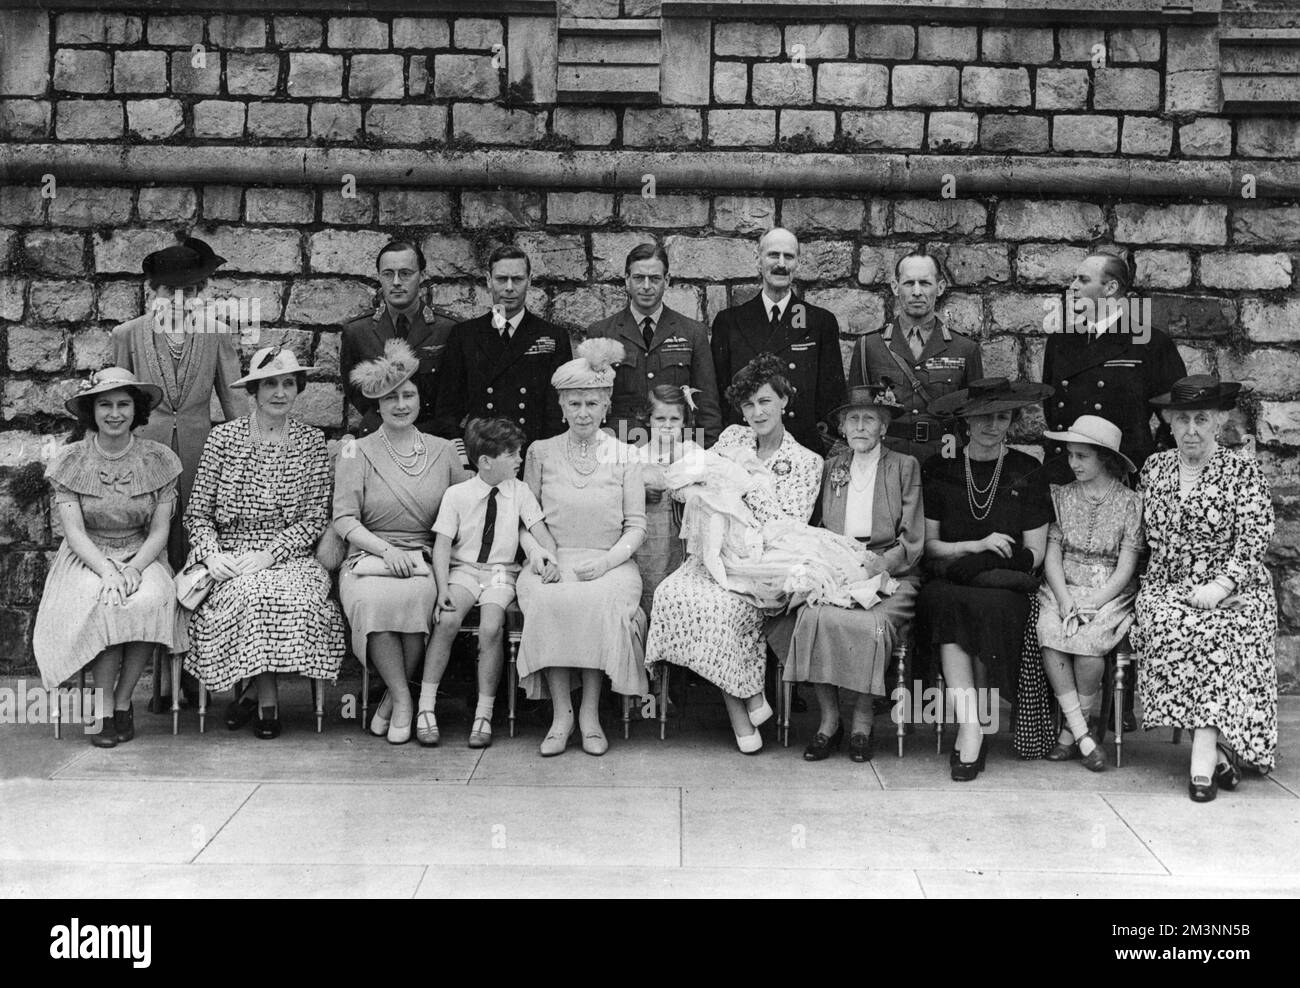 Christening of Prince Michael George Charles Franklin, third child of Prince George, Duke of Kent, and Princess Marina, Duchess of Kent.  He was born on 4 July 1942 and his father was killed in a flying accident while on duty when he was just seven weeks old.  Back row from left: Princess Marie Louise, Prince Bernhard of the Netherlands, King George VI, Duke of Kent, King Haakon of Norway, King George of the Hellenes, Crown Prince Olaf of Norway.  Seated from left, Princess Elizabeth (Queen Elizabeth II), Lady Patricia Ramsey (formerly Princess Patricia of Connaught), Queen Elizabeth, the Quee Stock Photo